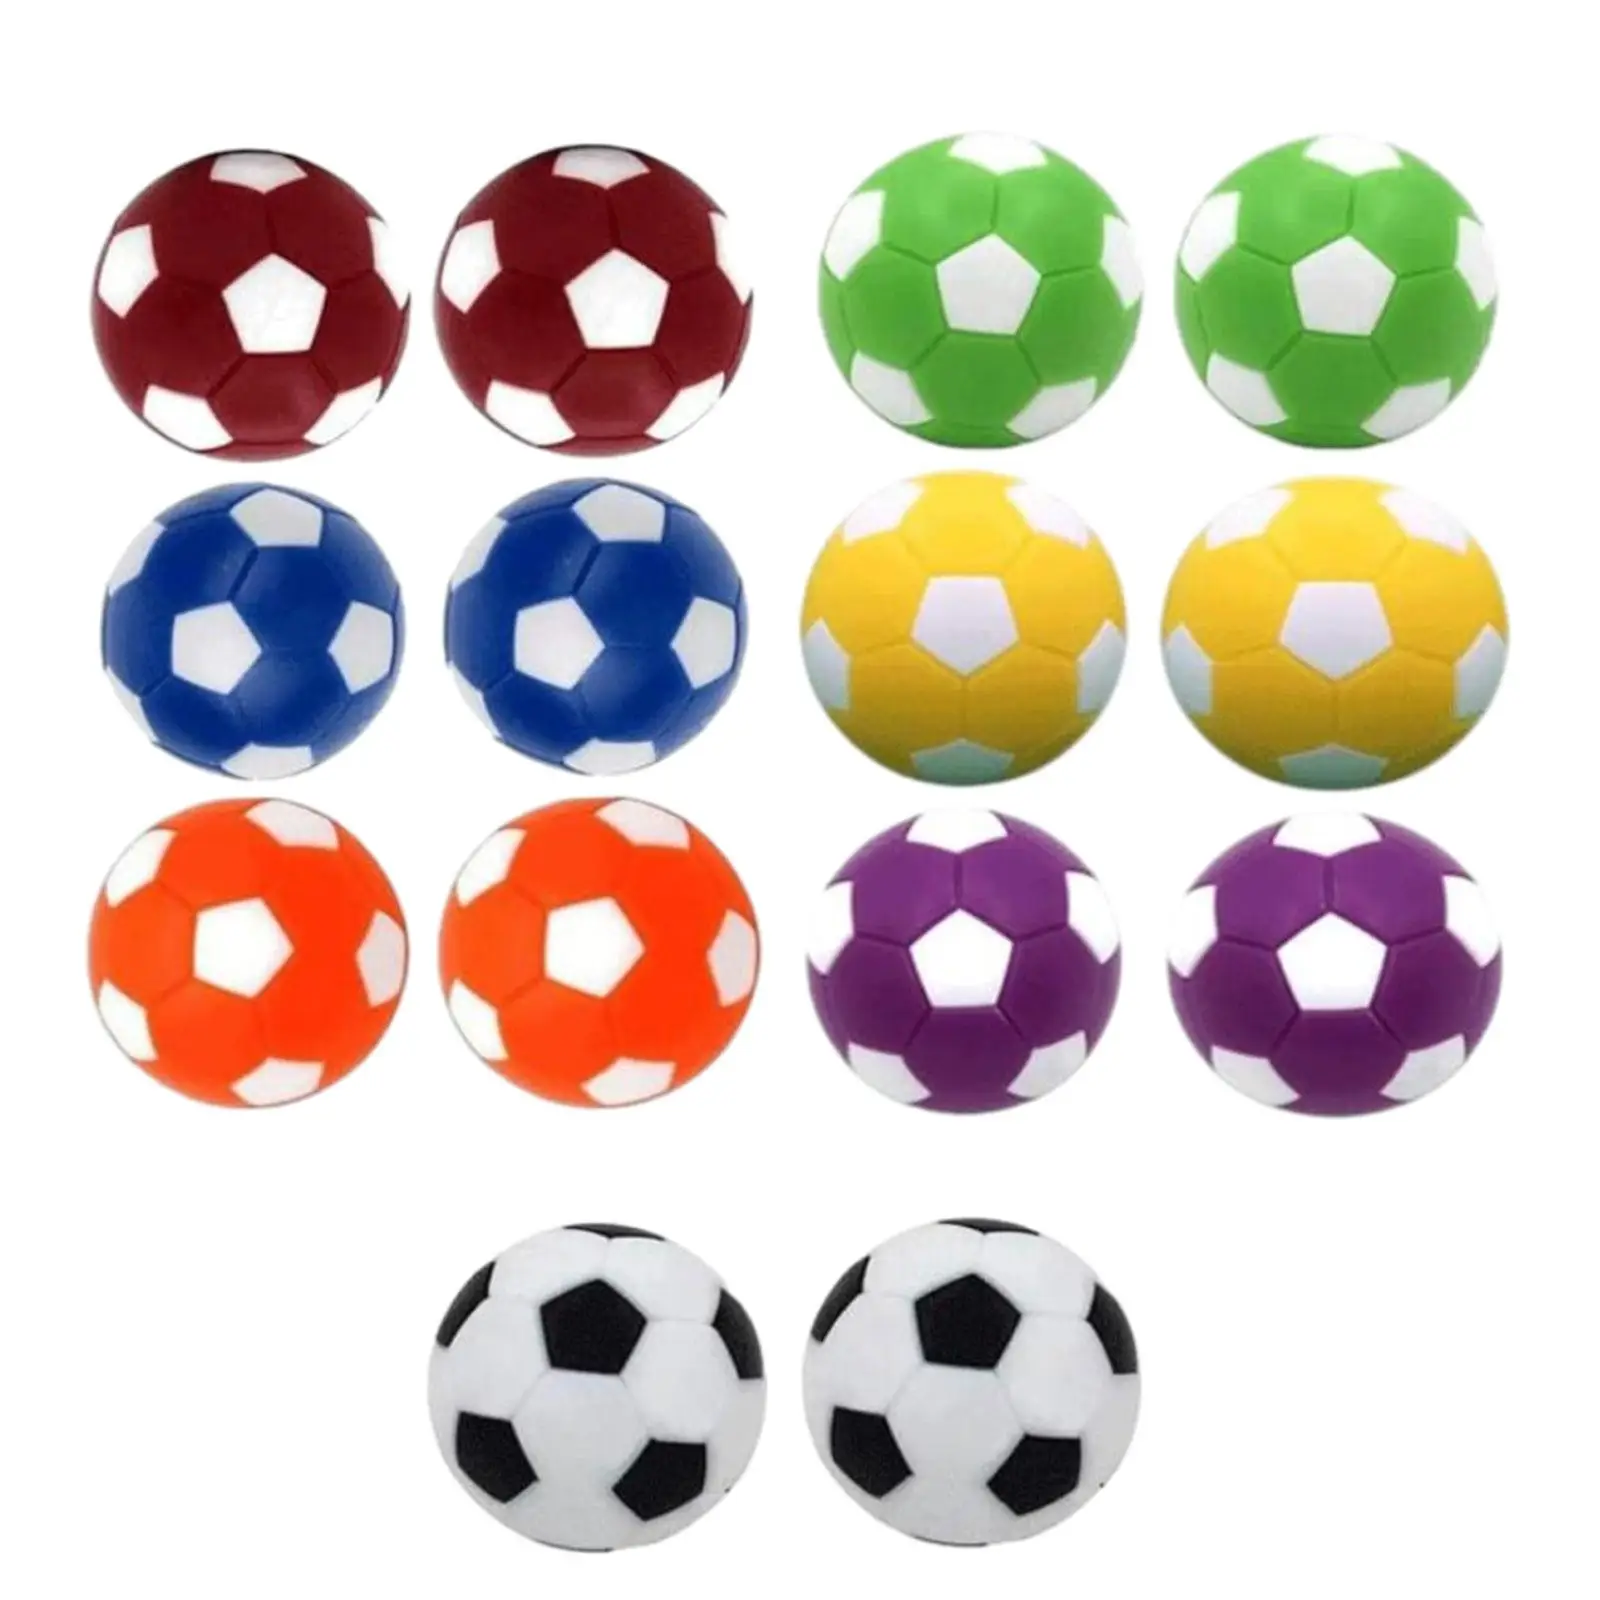 

14x Foosball Balls 1.42" Mini 7 Colors Multicolor 36mm for Finger Sport Table Football Machine Party Games Tabletop Game Indoor